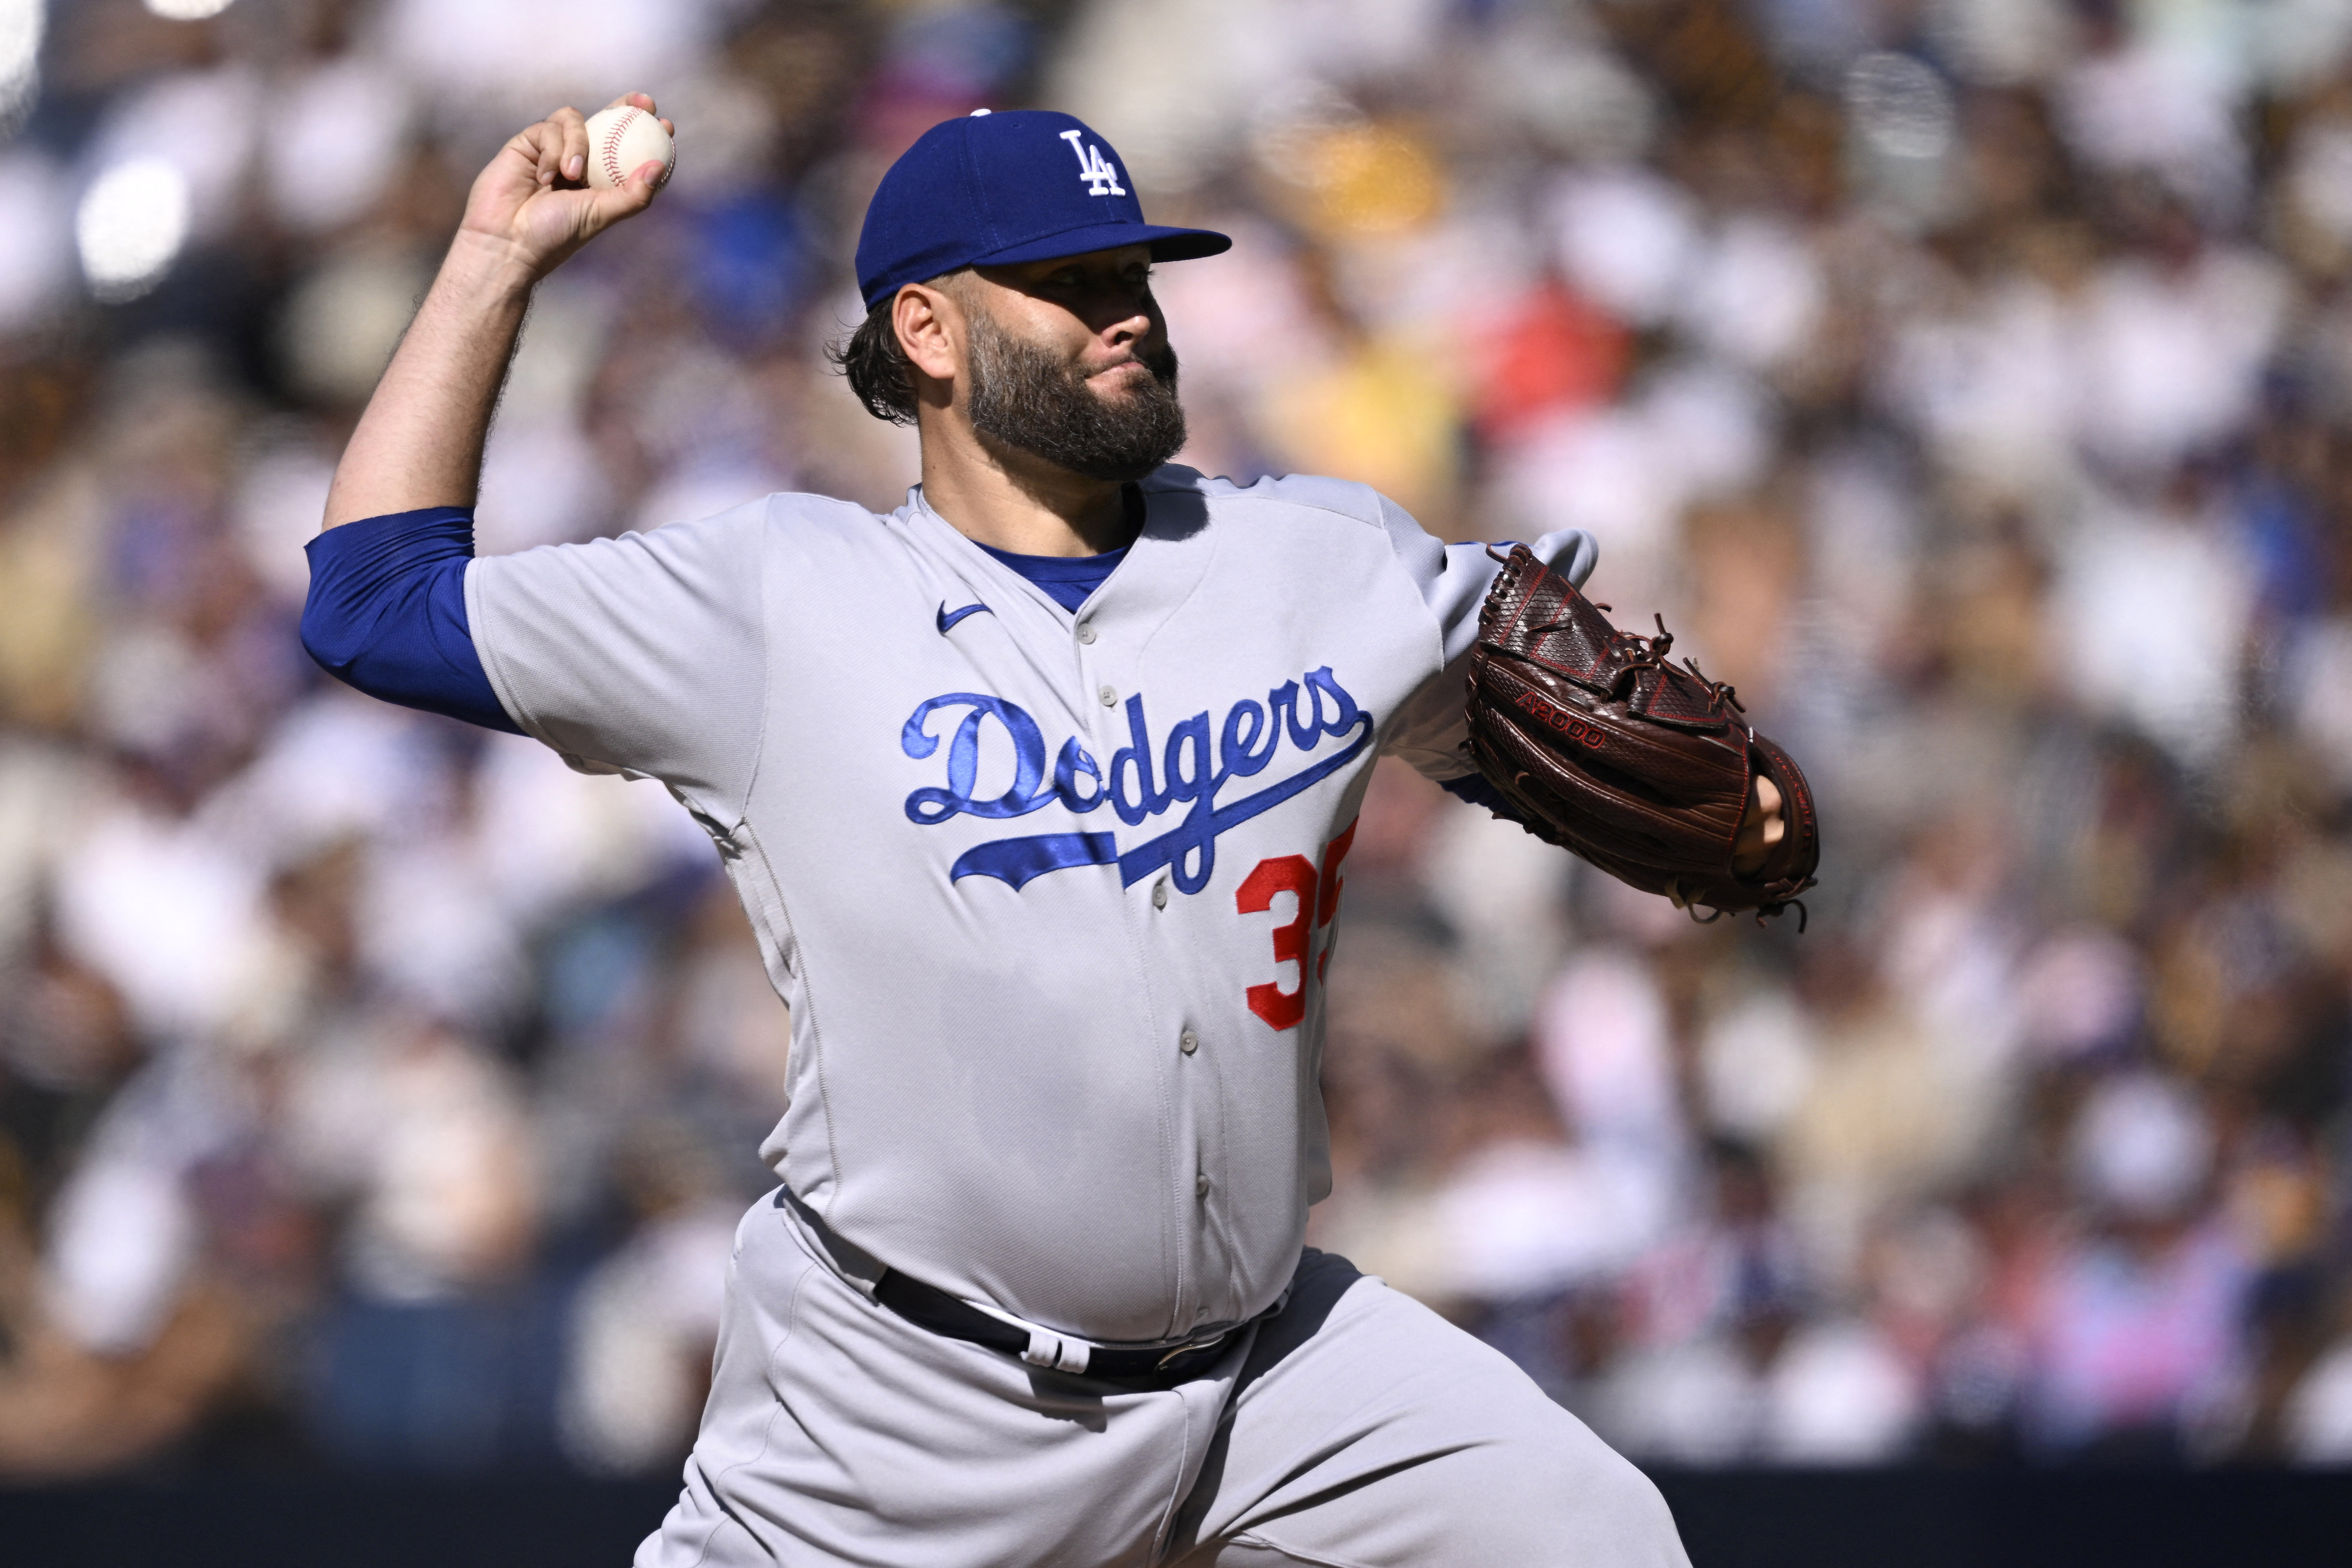 Dodgers get off to fast start in win over Padres